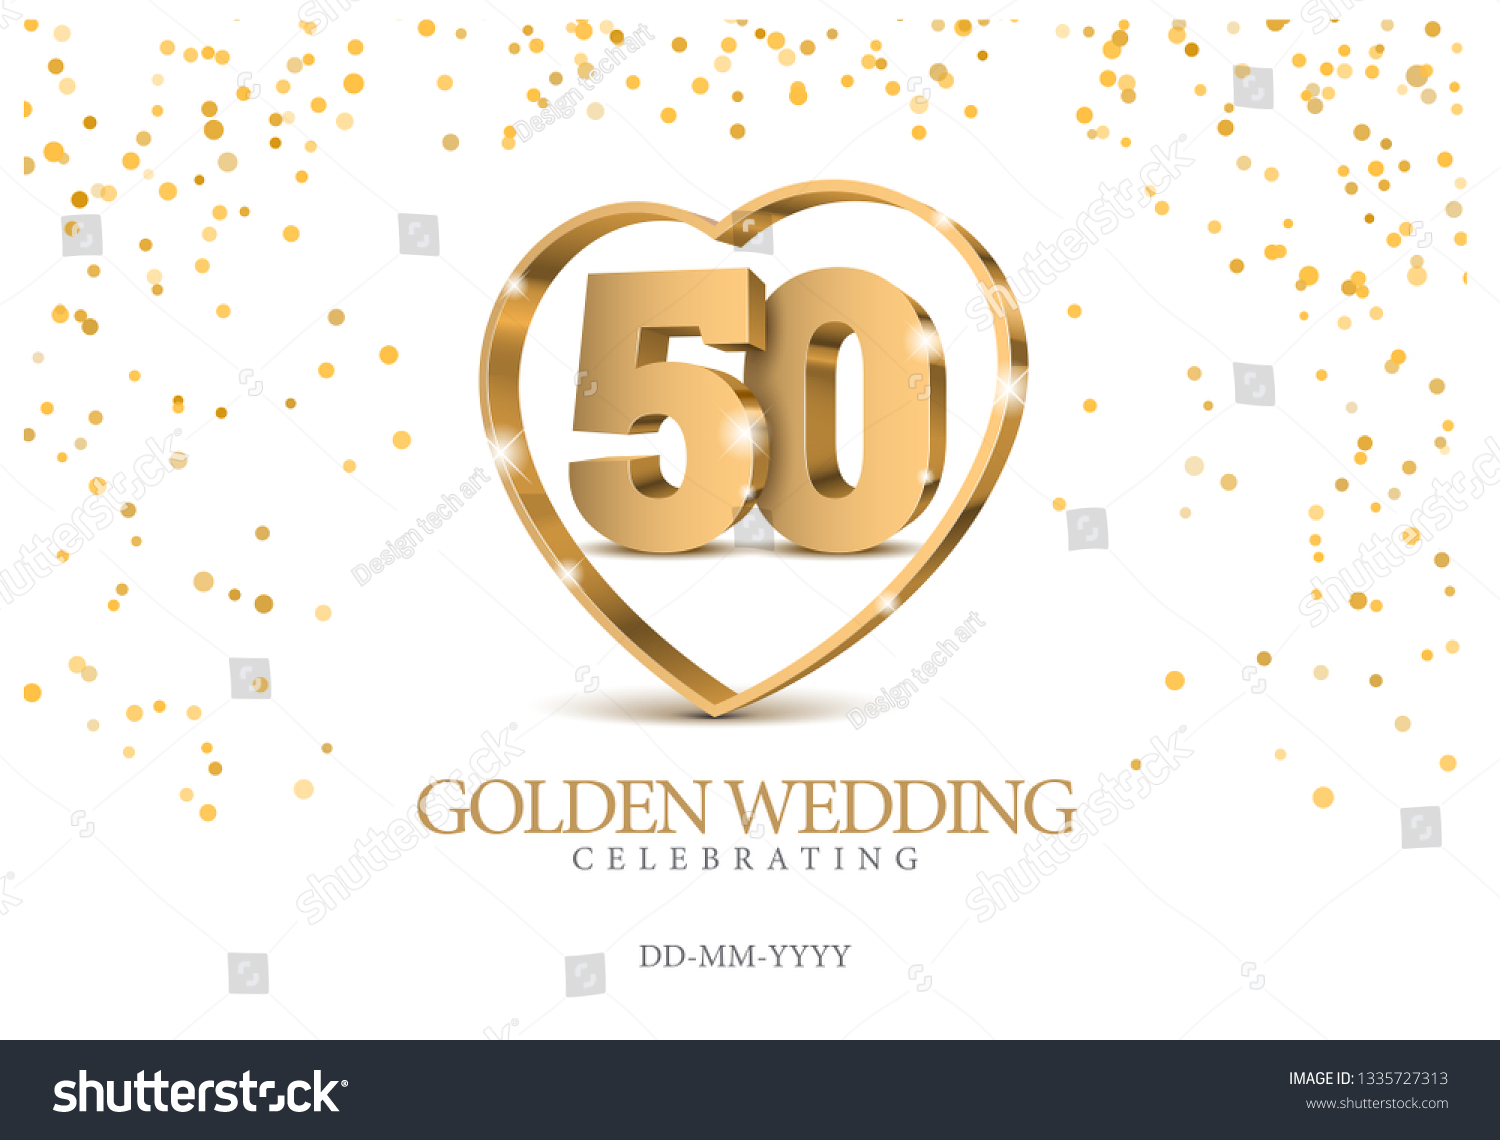 SVG of Anniversary golden wedding 50 years married. gold 3d numbers in heart. Poster template for Celebrating 50th anniversary event party. Vector illustration svg